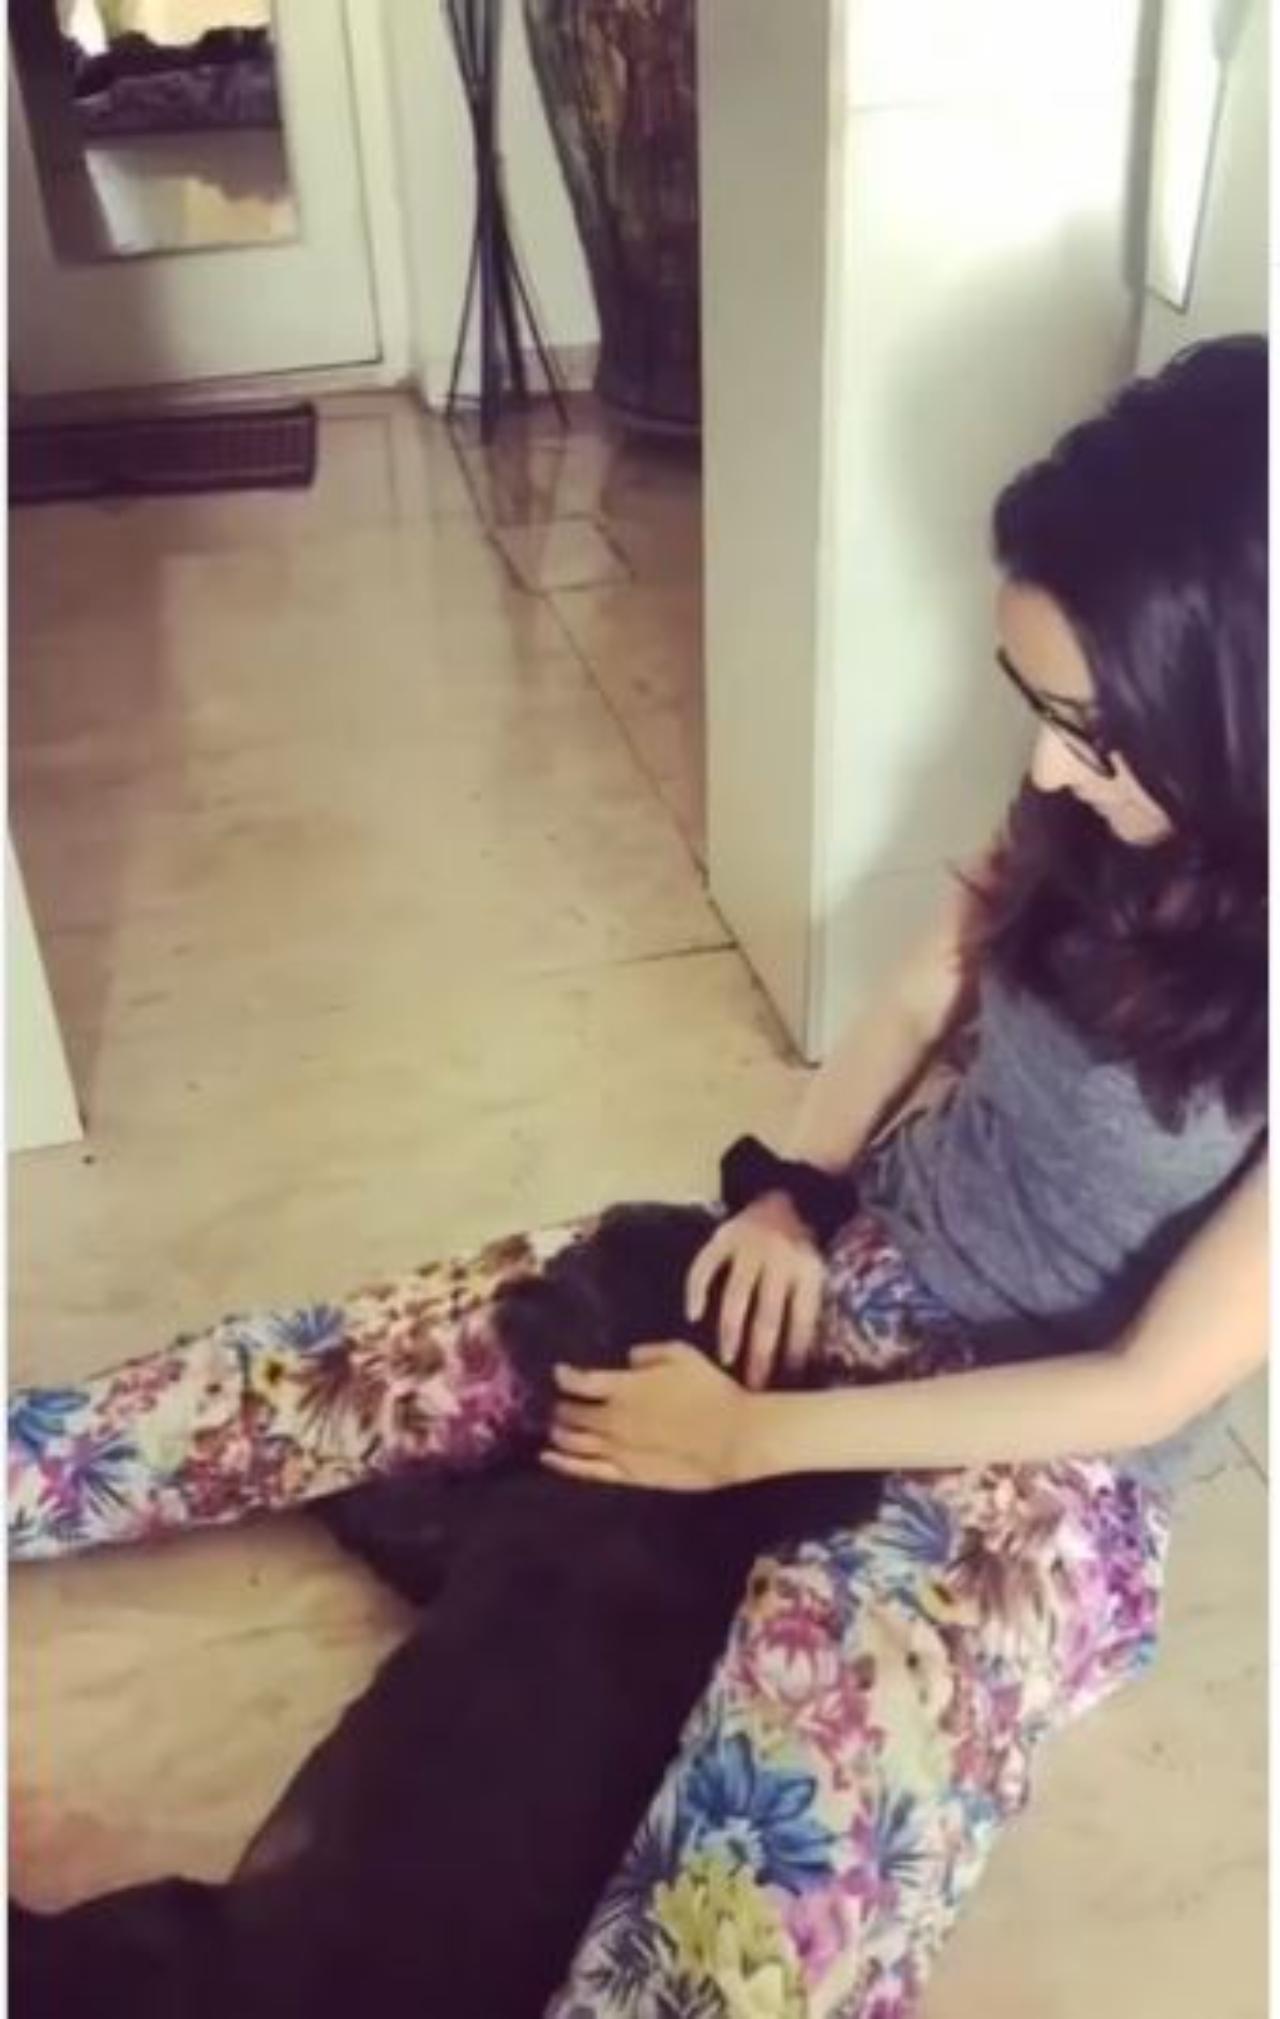 On her furball's birthday, Shraddha shared an adorable reel on social media wherein we can see Shraddha being showered with love and kissies from Shyloh